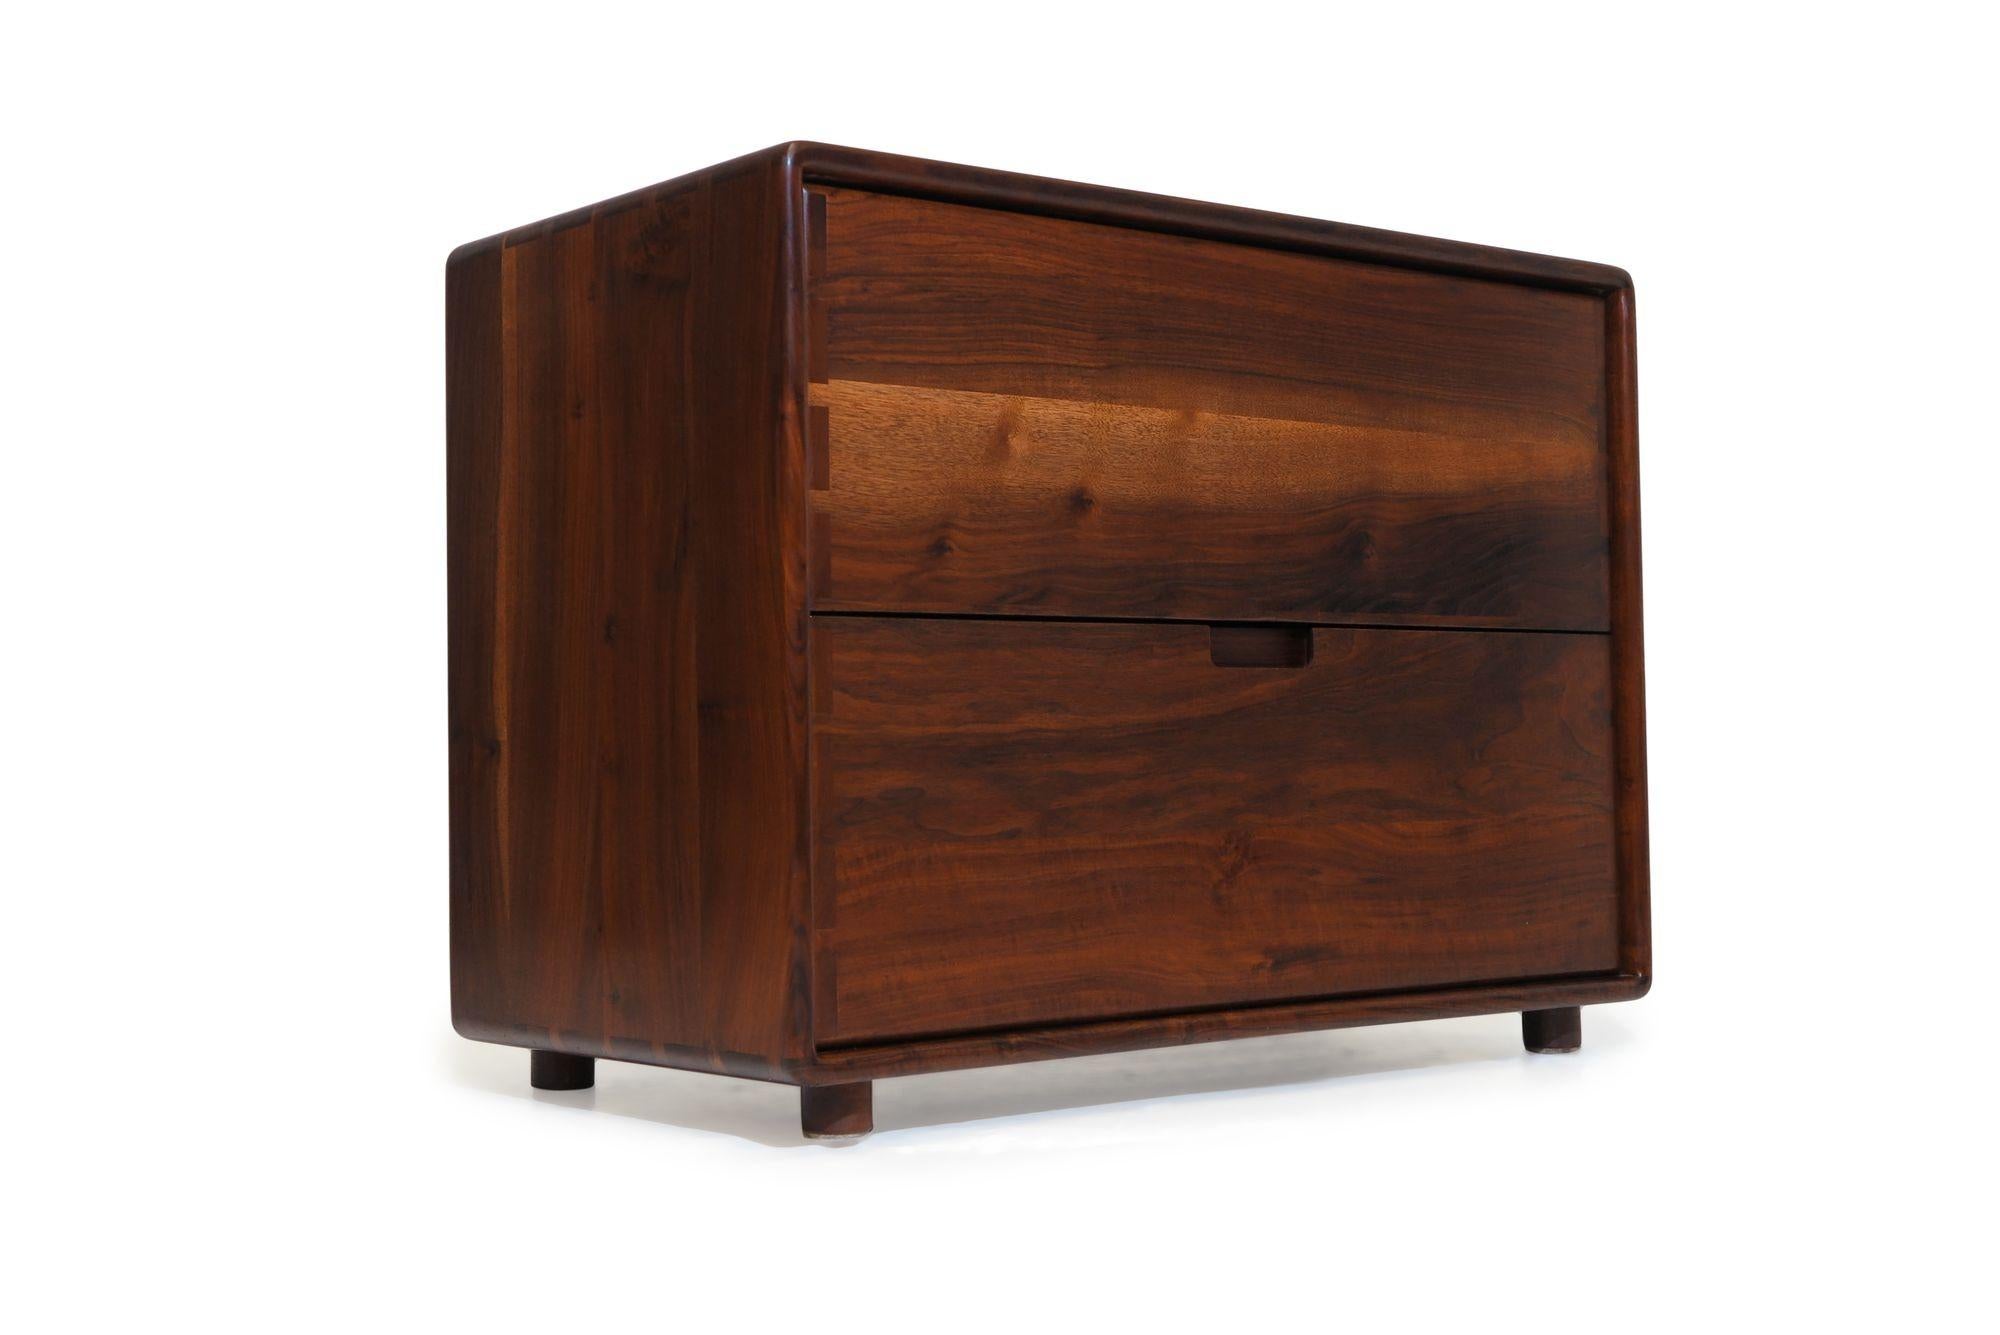 California studio craft filing cabinet designed by Jim Sweeney, Berkeley, circa 1983. The cabinet is handcrafted of solid black walnut, and features two filing drawers with boldly exposed joinery on the cabinet and drawers. The cabinets have been